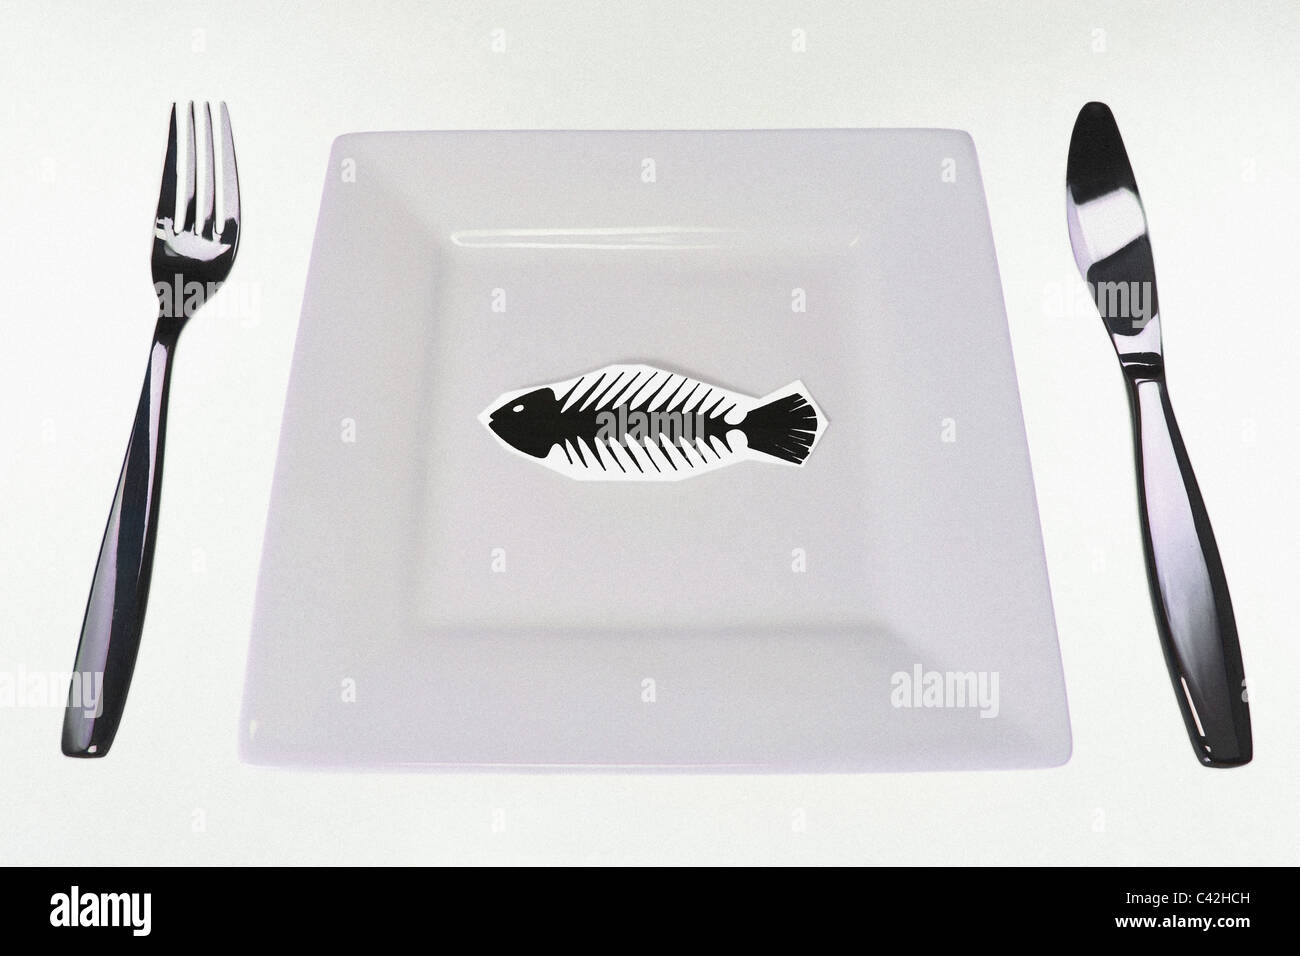 drawn fish skeleton in the middle of the dish and minimalistic kitchen set symbolizes poverty and starvation. Copy-space. Stock Photo